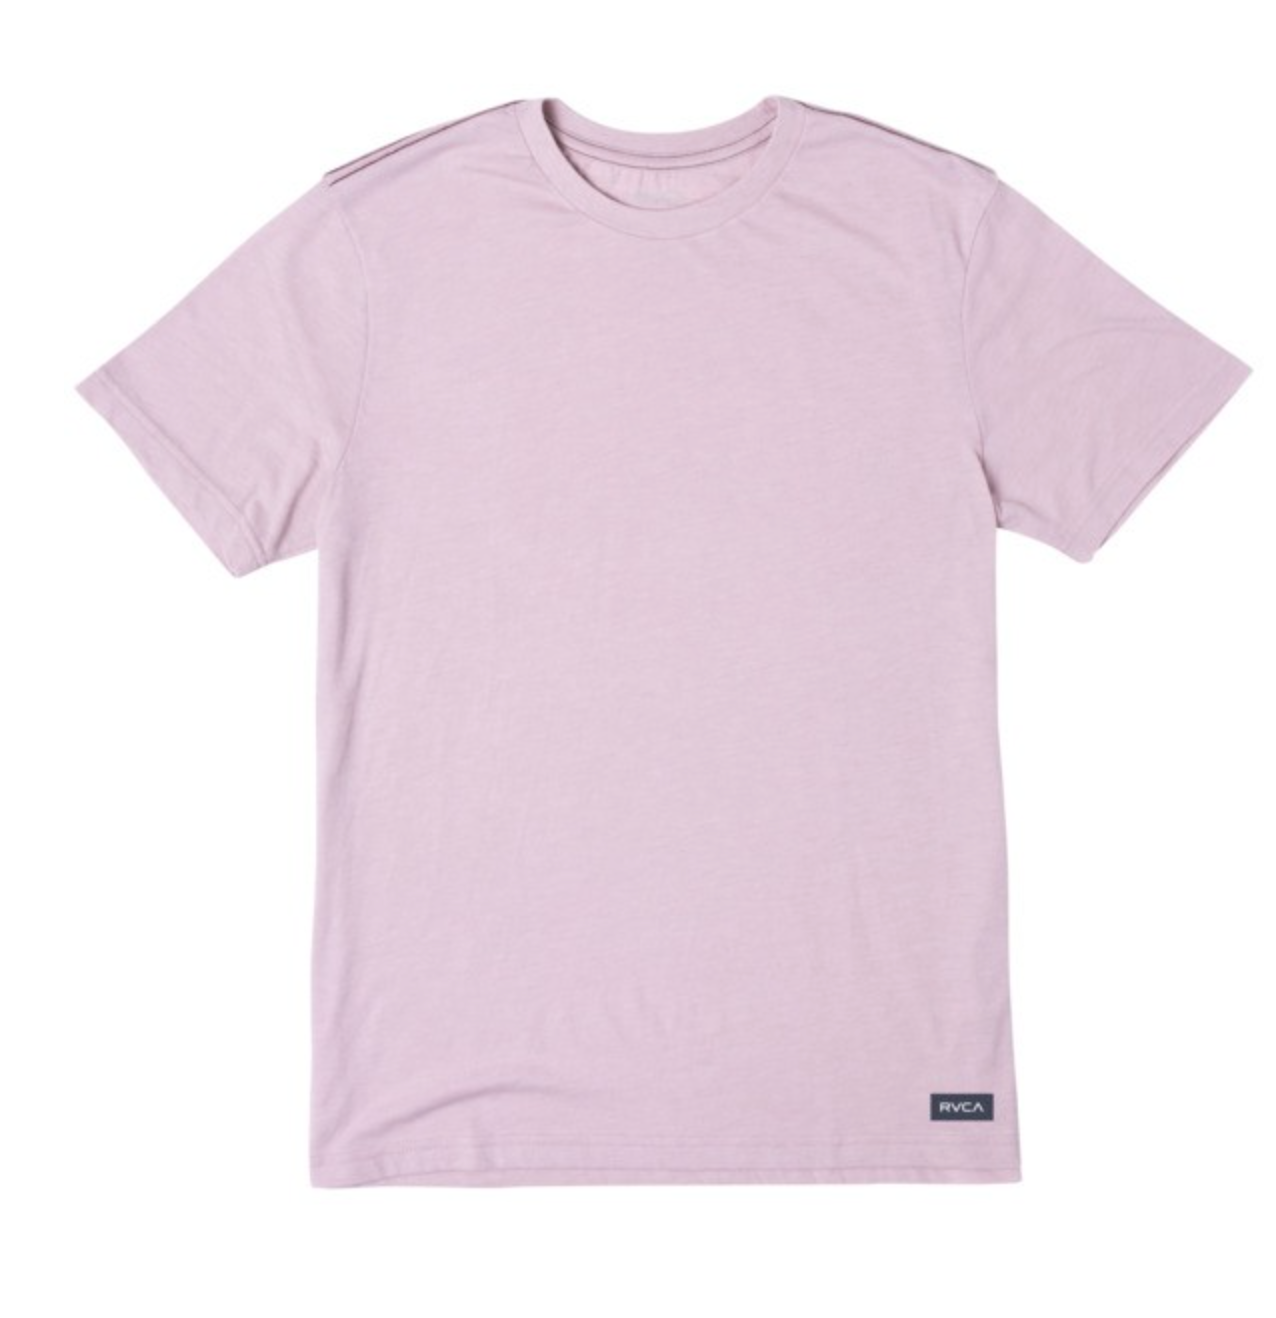 Solo Label SS Tee